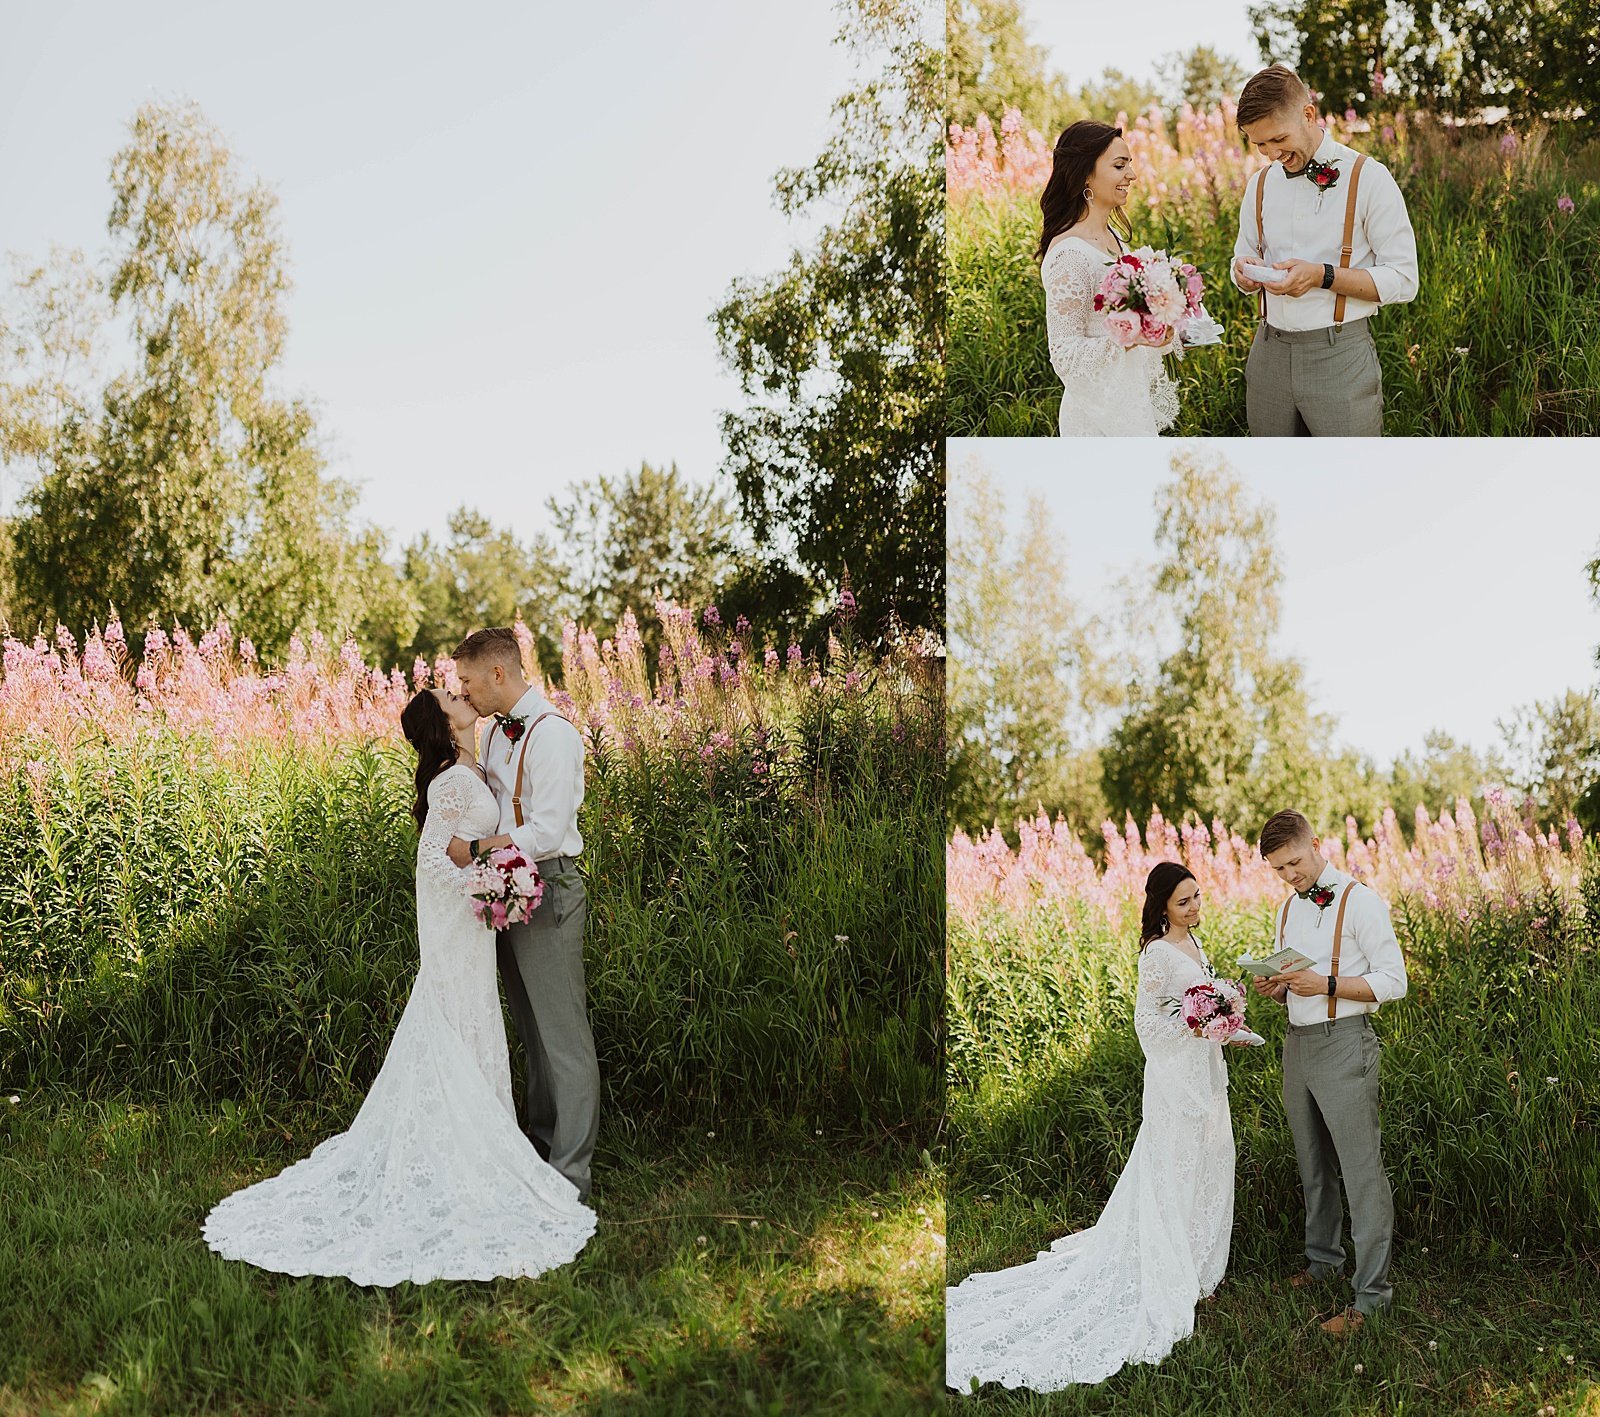  Bride and groom kissing in front of lavender fields for their Alaska Summer wedding.  